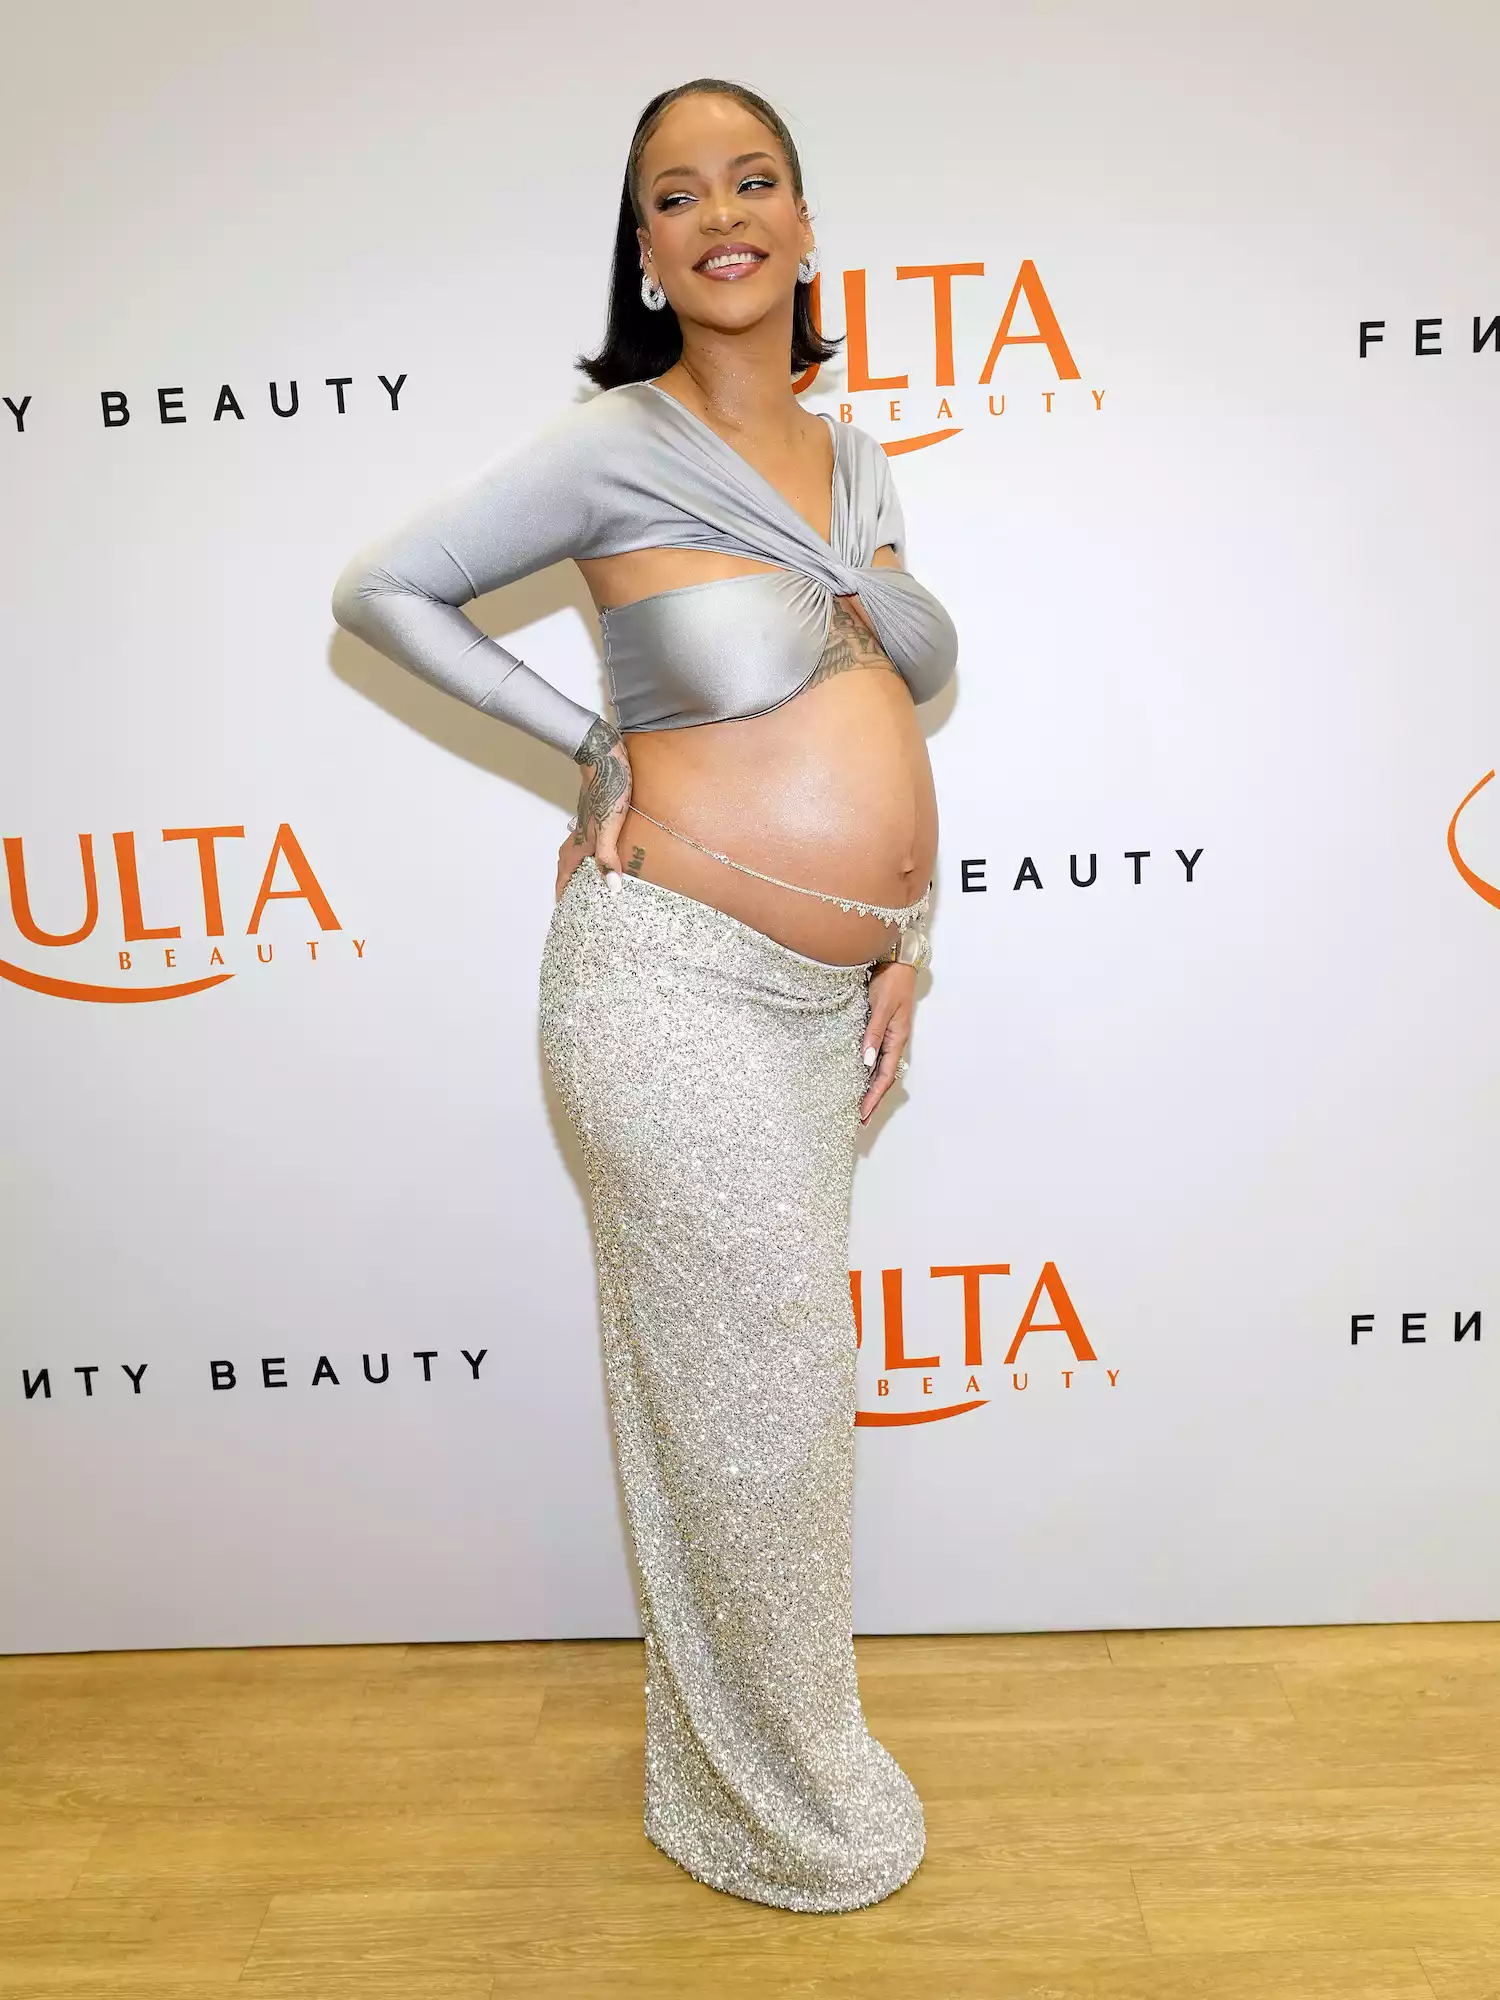 Rihanna wears a silver Coperni crop top and glitter maxi skirt to the Fenty Beauty launch at Ulta in 2022